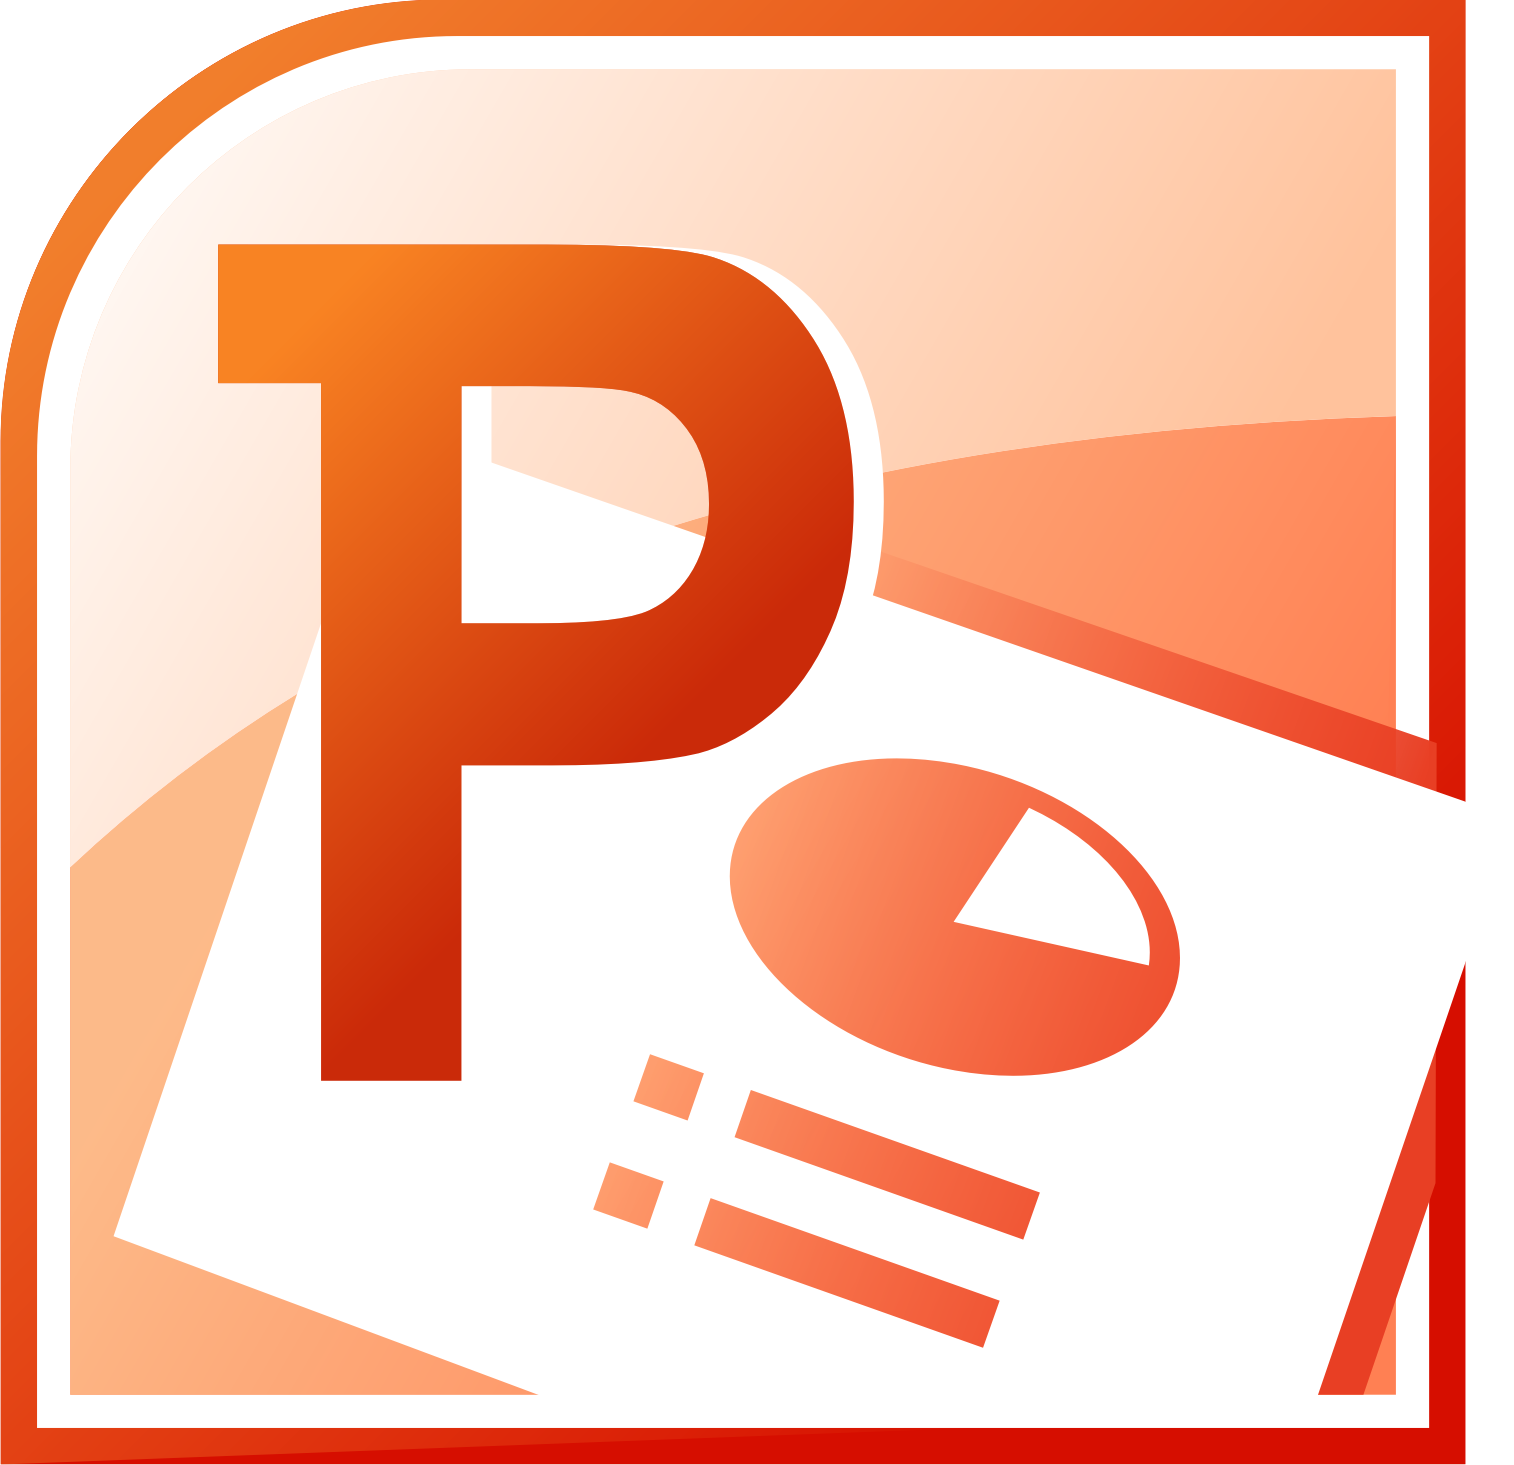 Ms Powerpoint Png Photo - Powerpoint, Transparent background PNG HD thumbnail